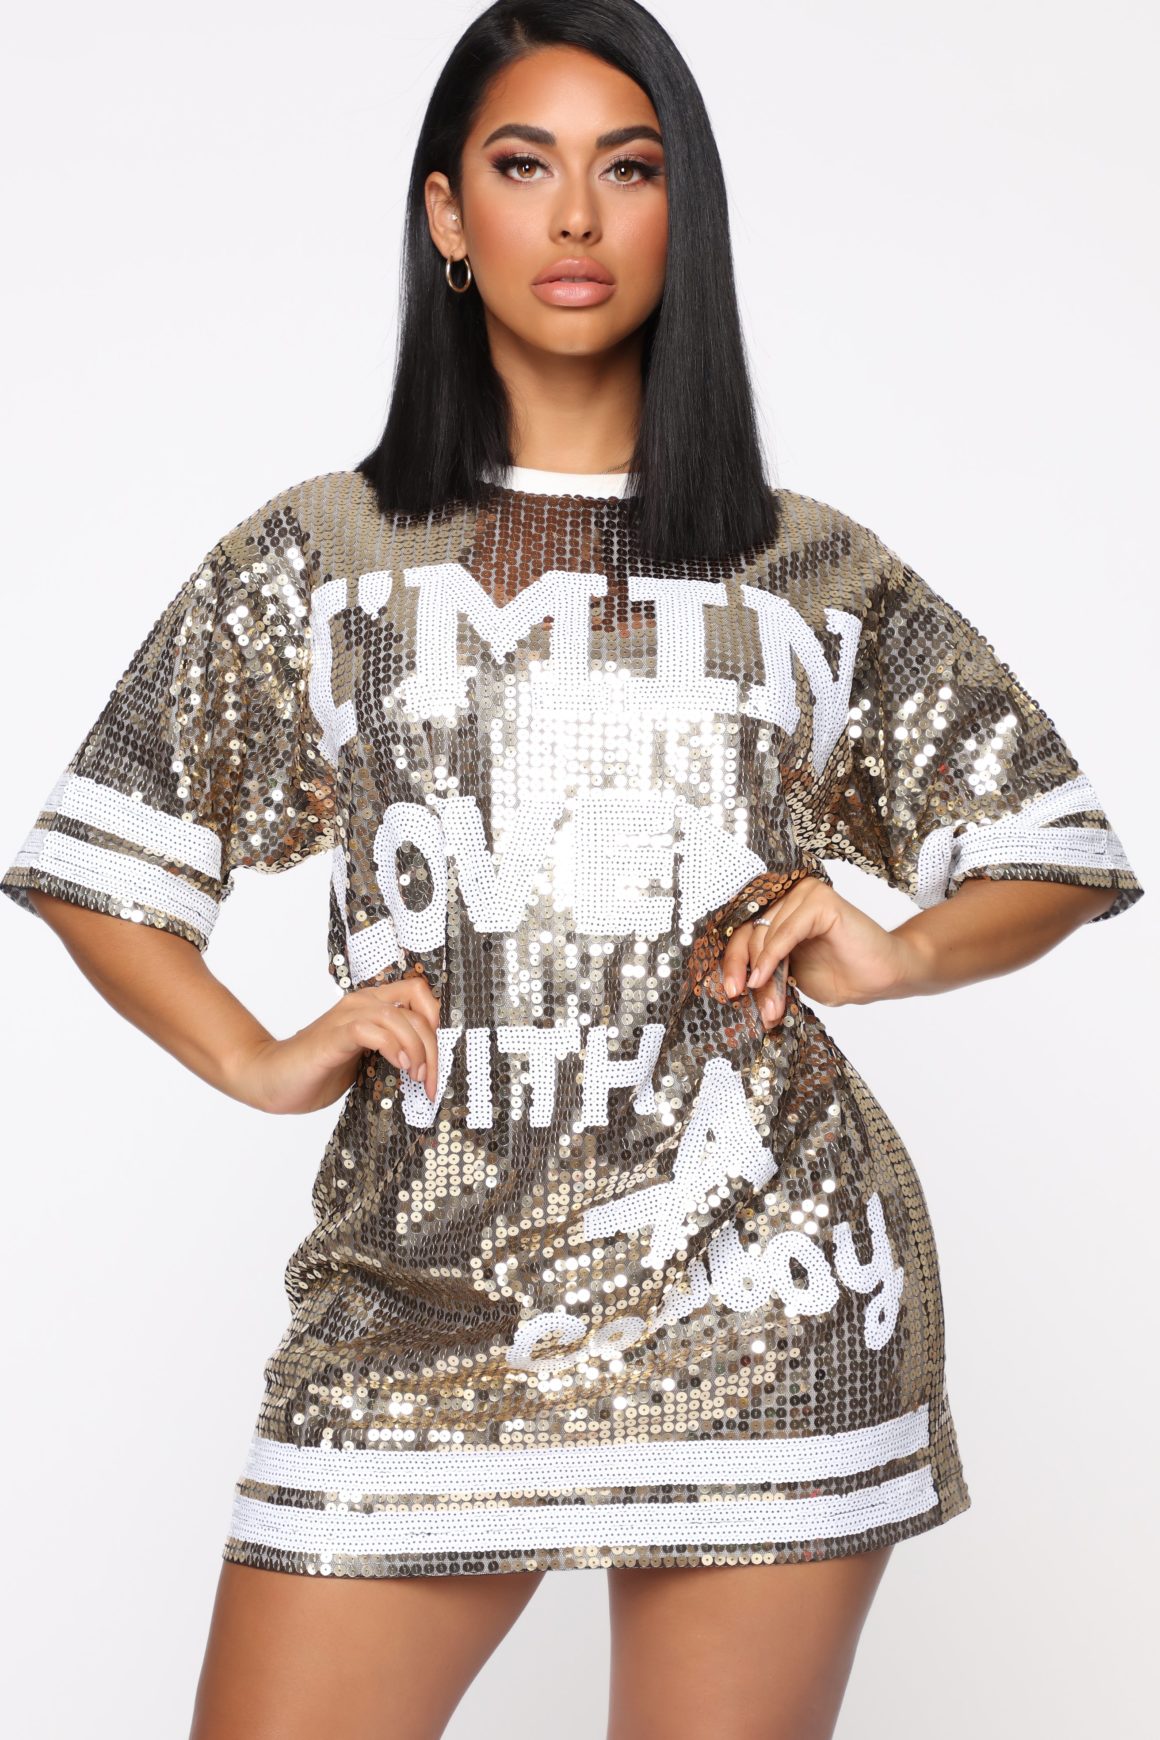 Angela Simmons Shimmered in a Sequined Fashion Nova T-Shirt Dress ...